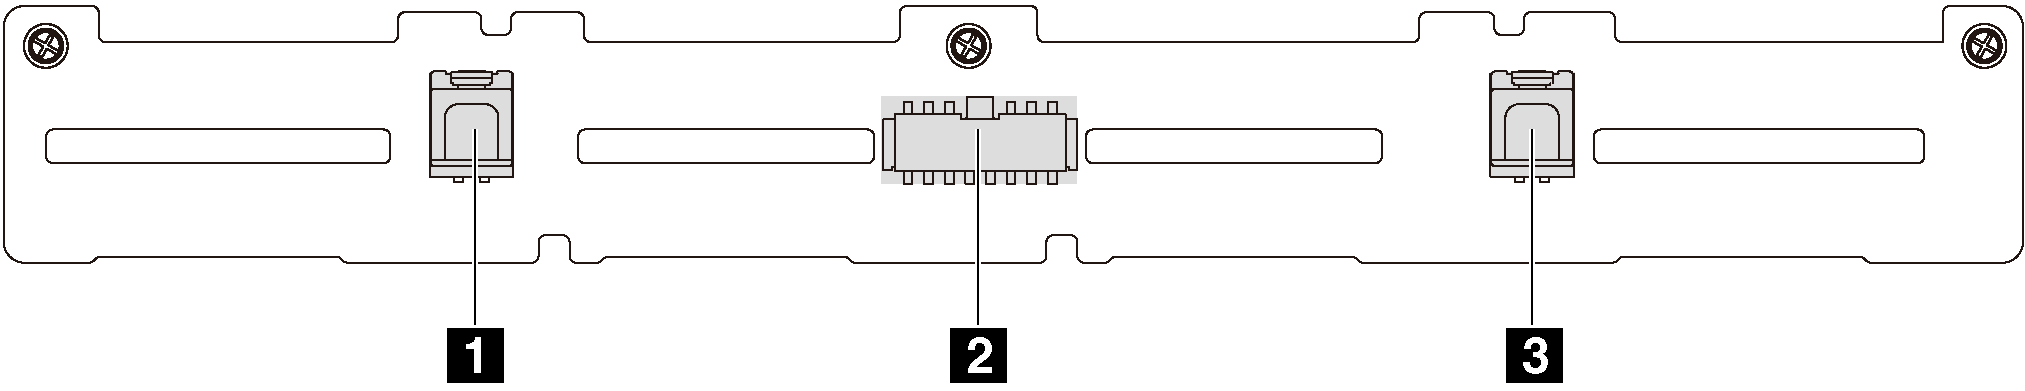 Connectors on the backplane for eight 2.5-inch hot-swap drives